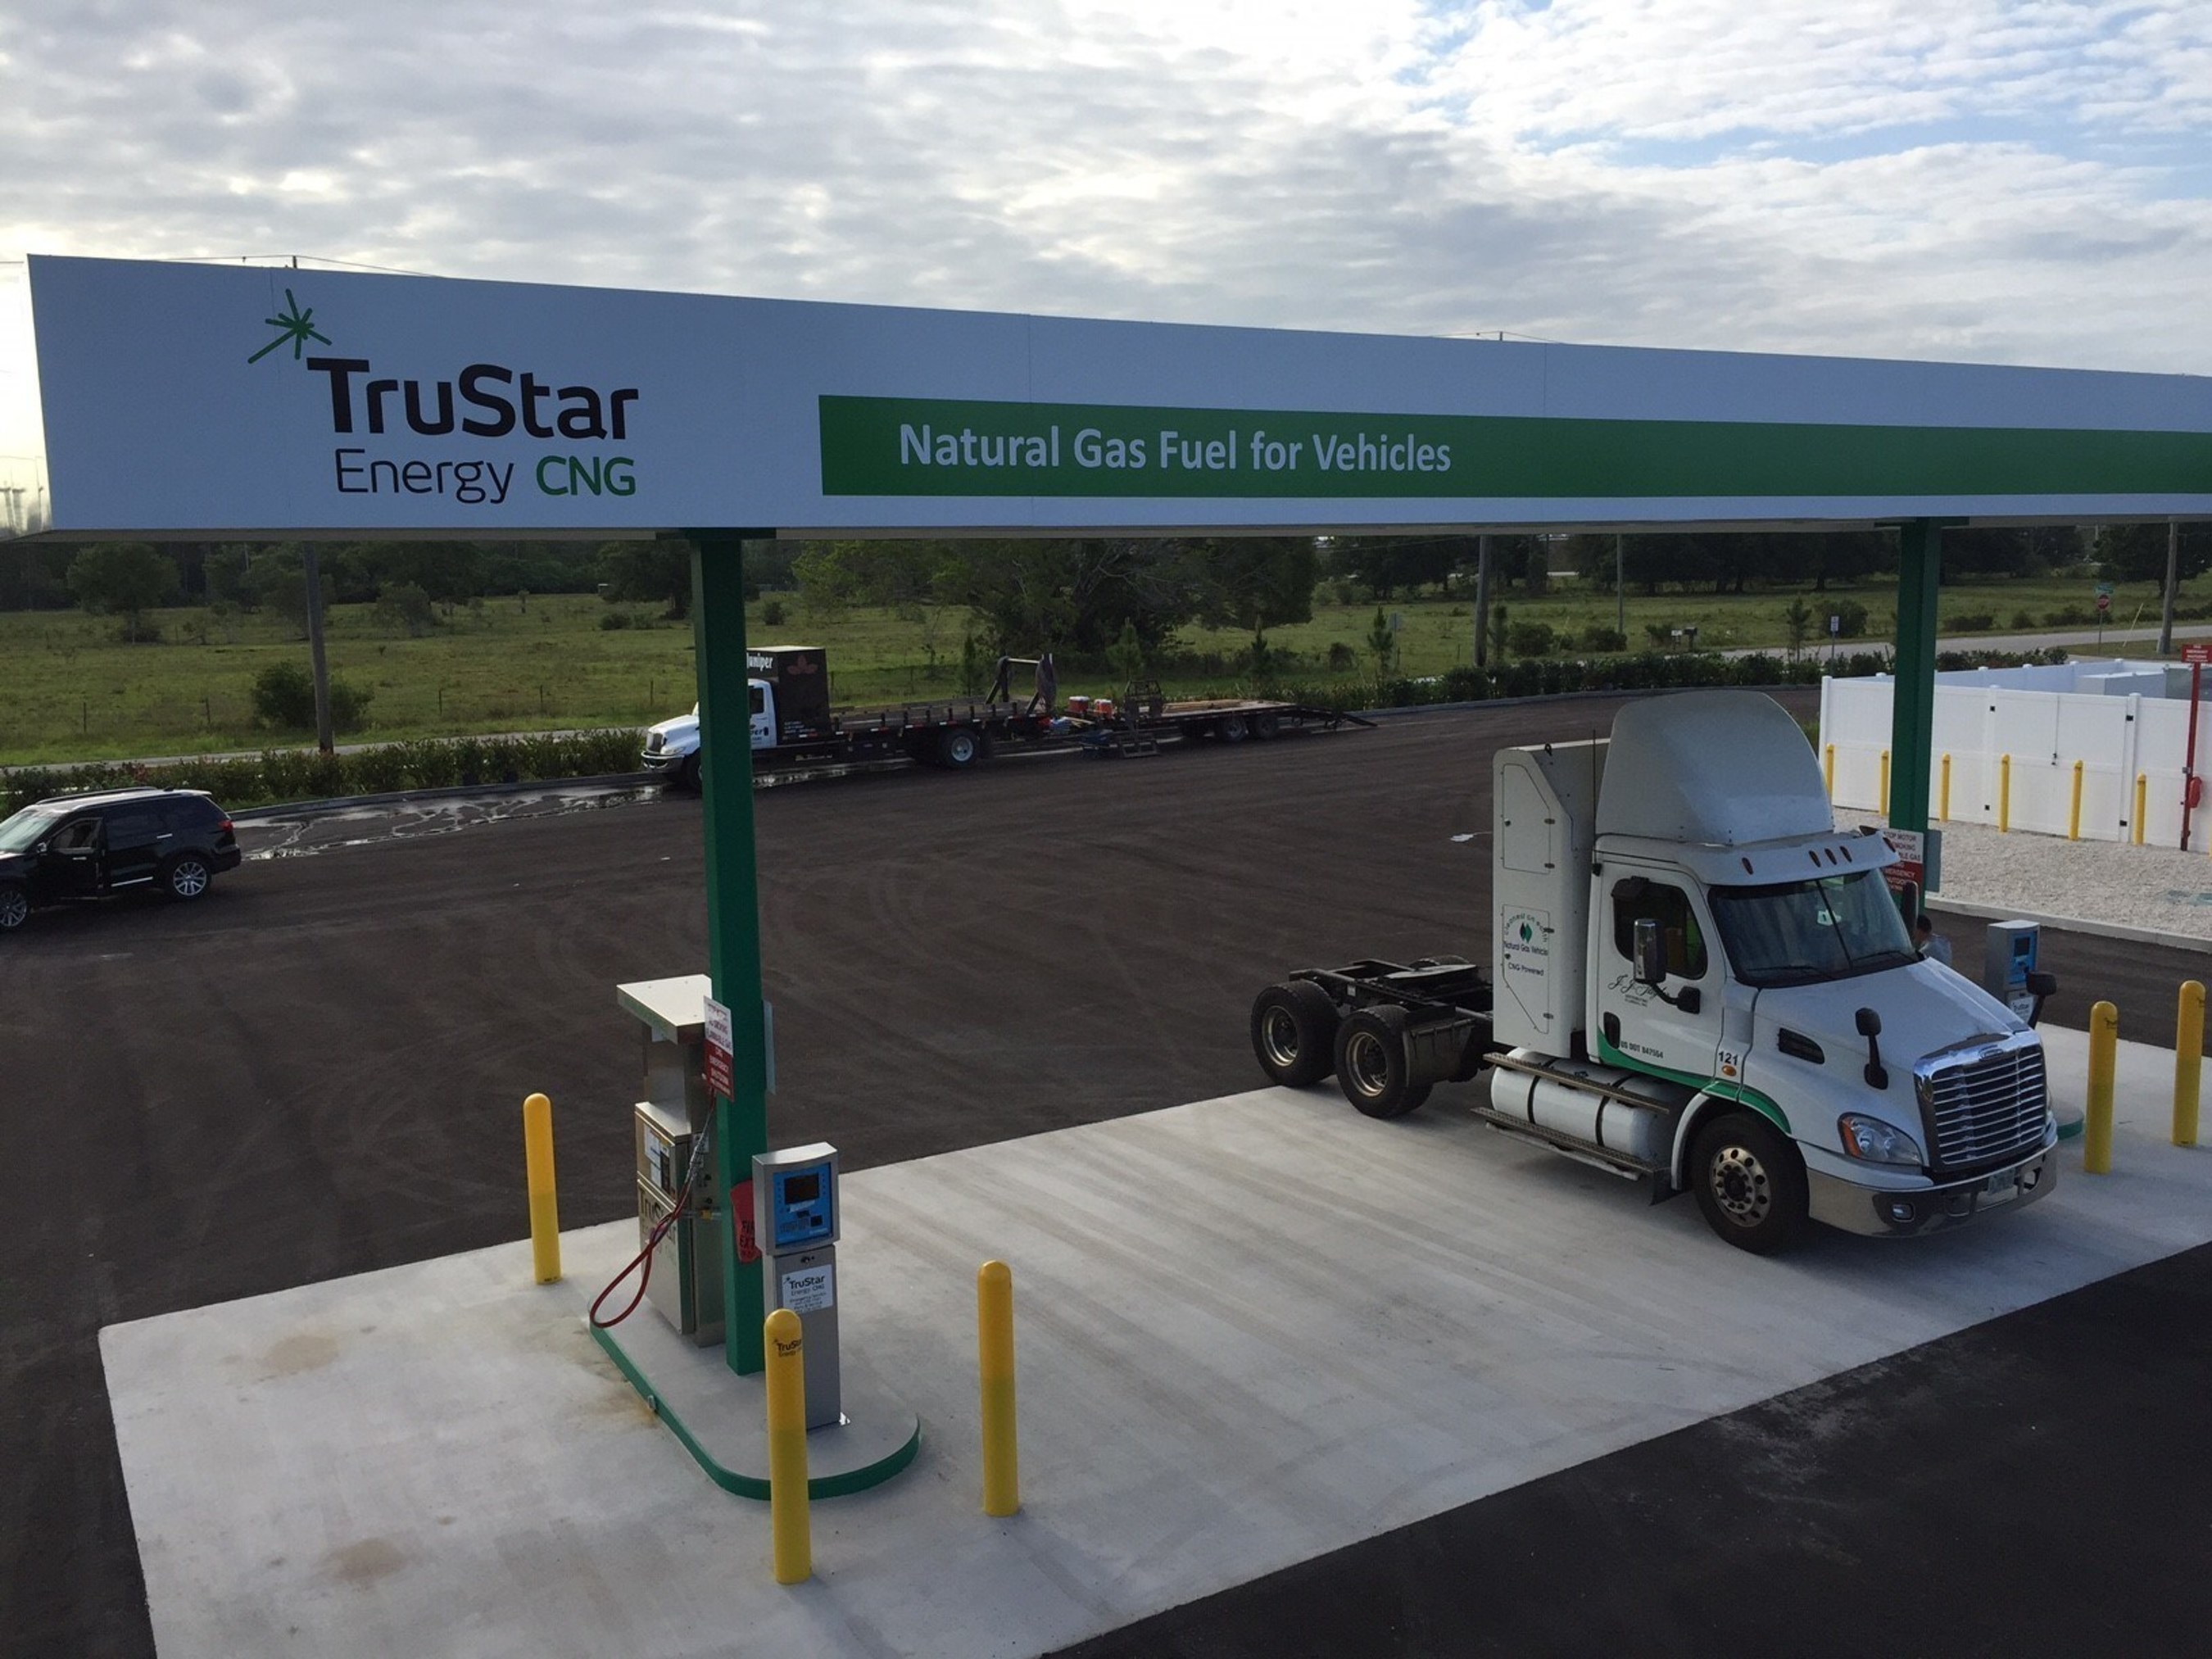 TruStar Energy-owned public CNG fueling station at 5345 Dividend Drive, Fort Myers, Florida.